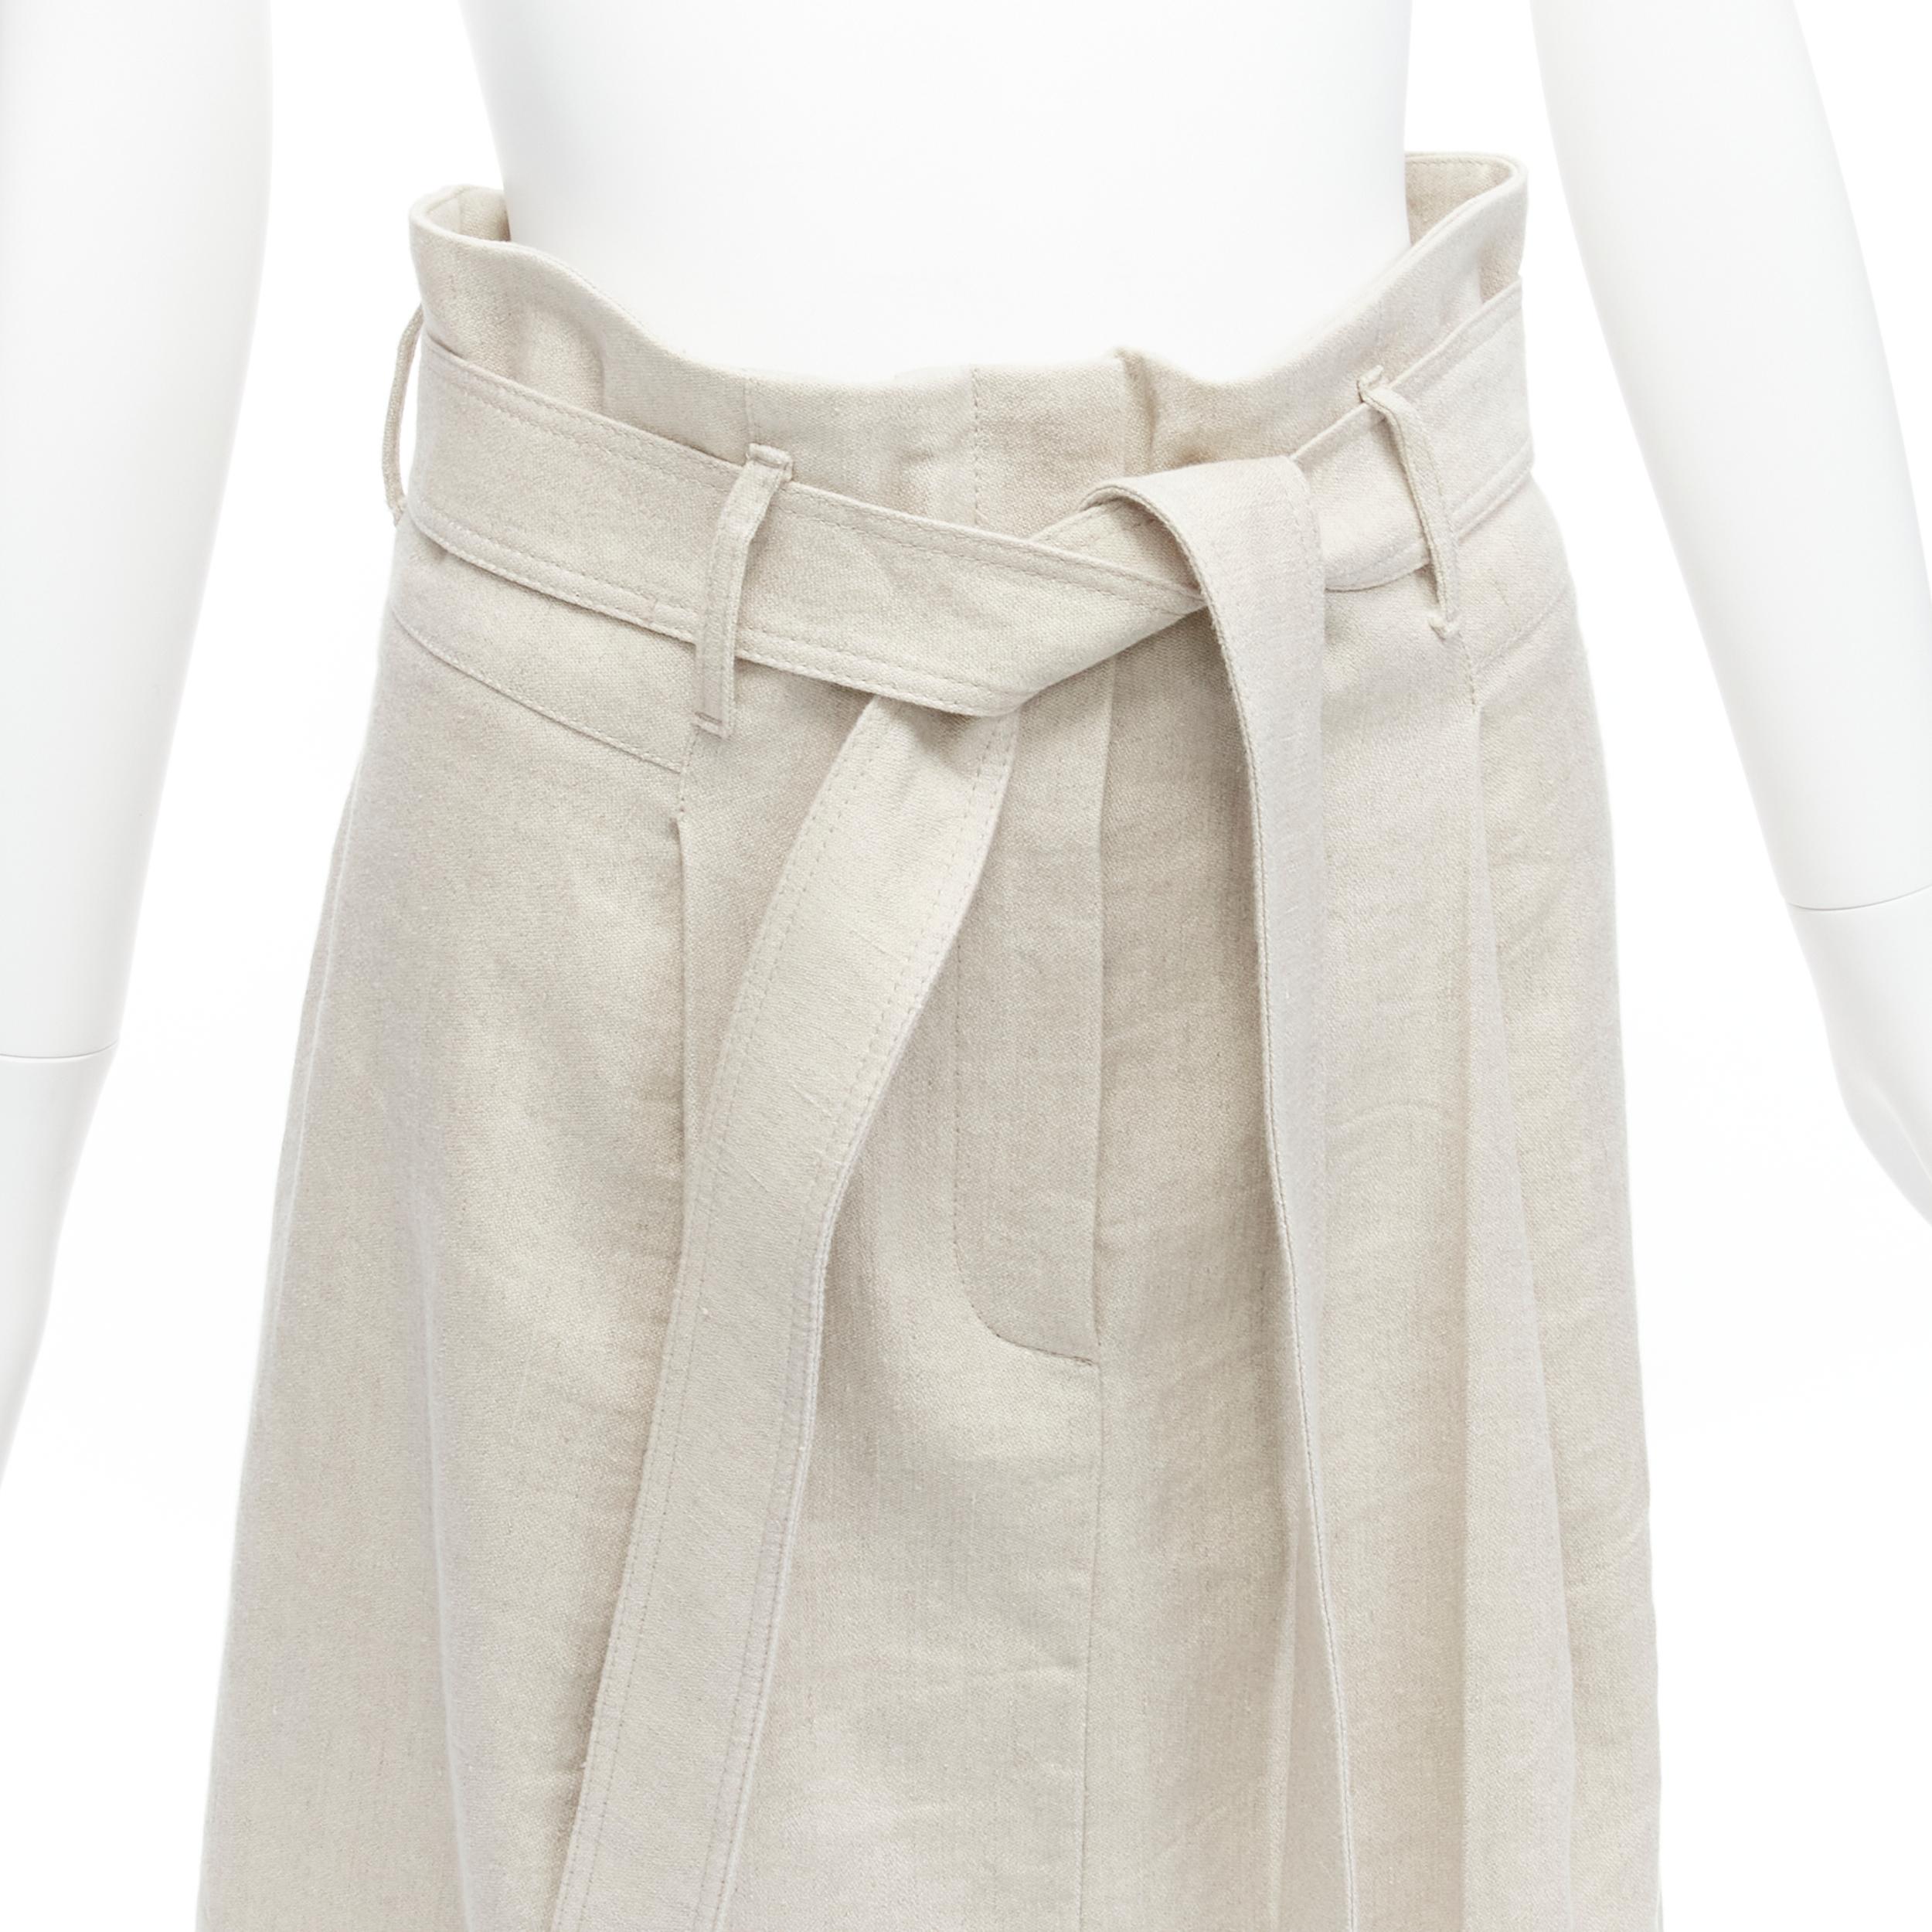 BRUNELLO CUCINELLI beige cotton linen tie belt A-line midi skirt IT40 S
Reference: CECU/A00022
Brand: Brunello Cucinelli
Material: Cotton, Linen
Color: Beige
Pattern: Solid
Closure: Zip
Lining: Beige Fabric
Extra Details: Zip at center front with